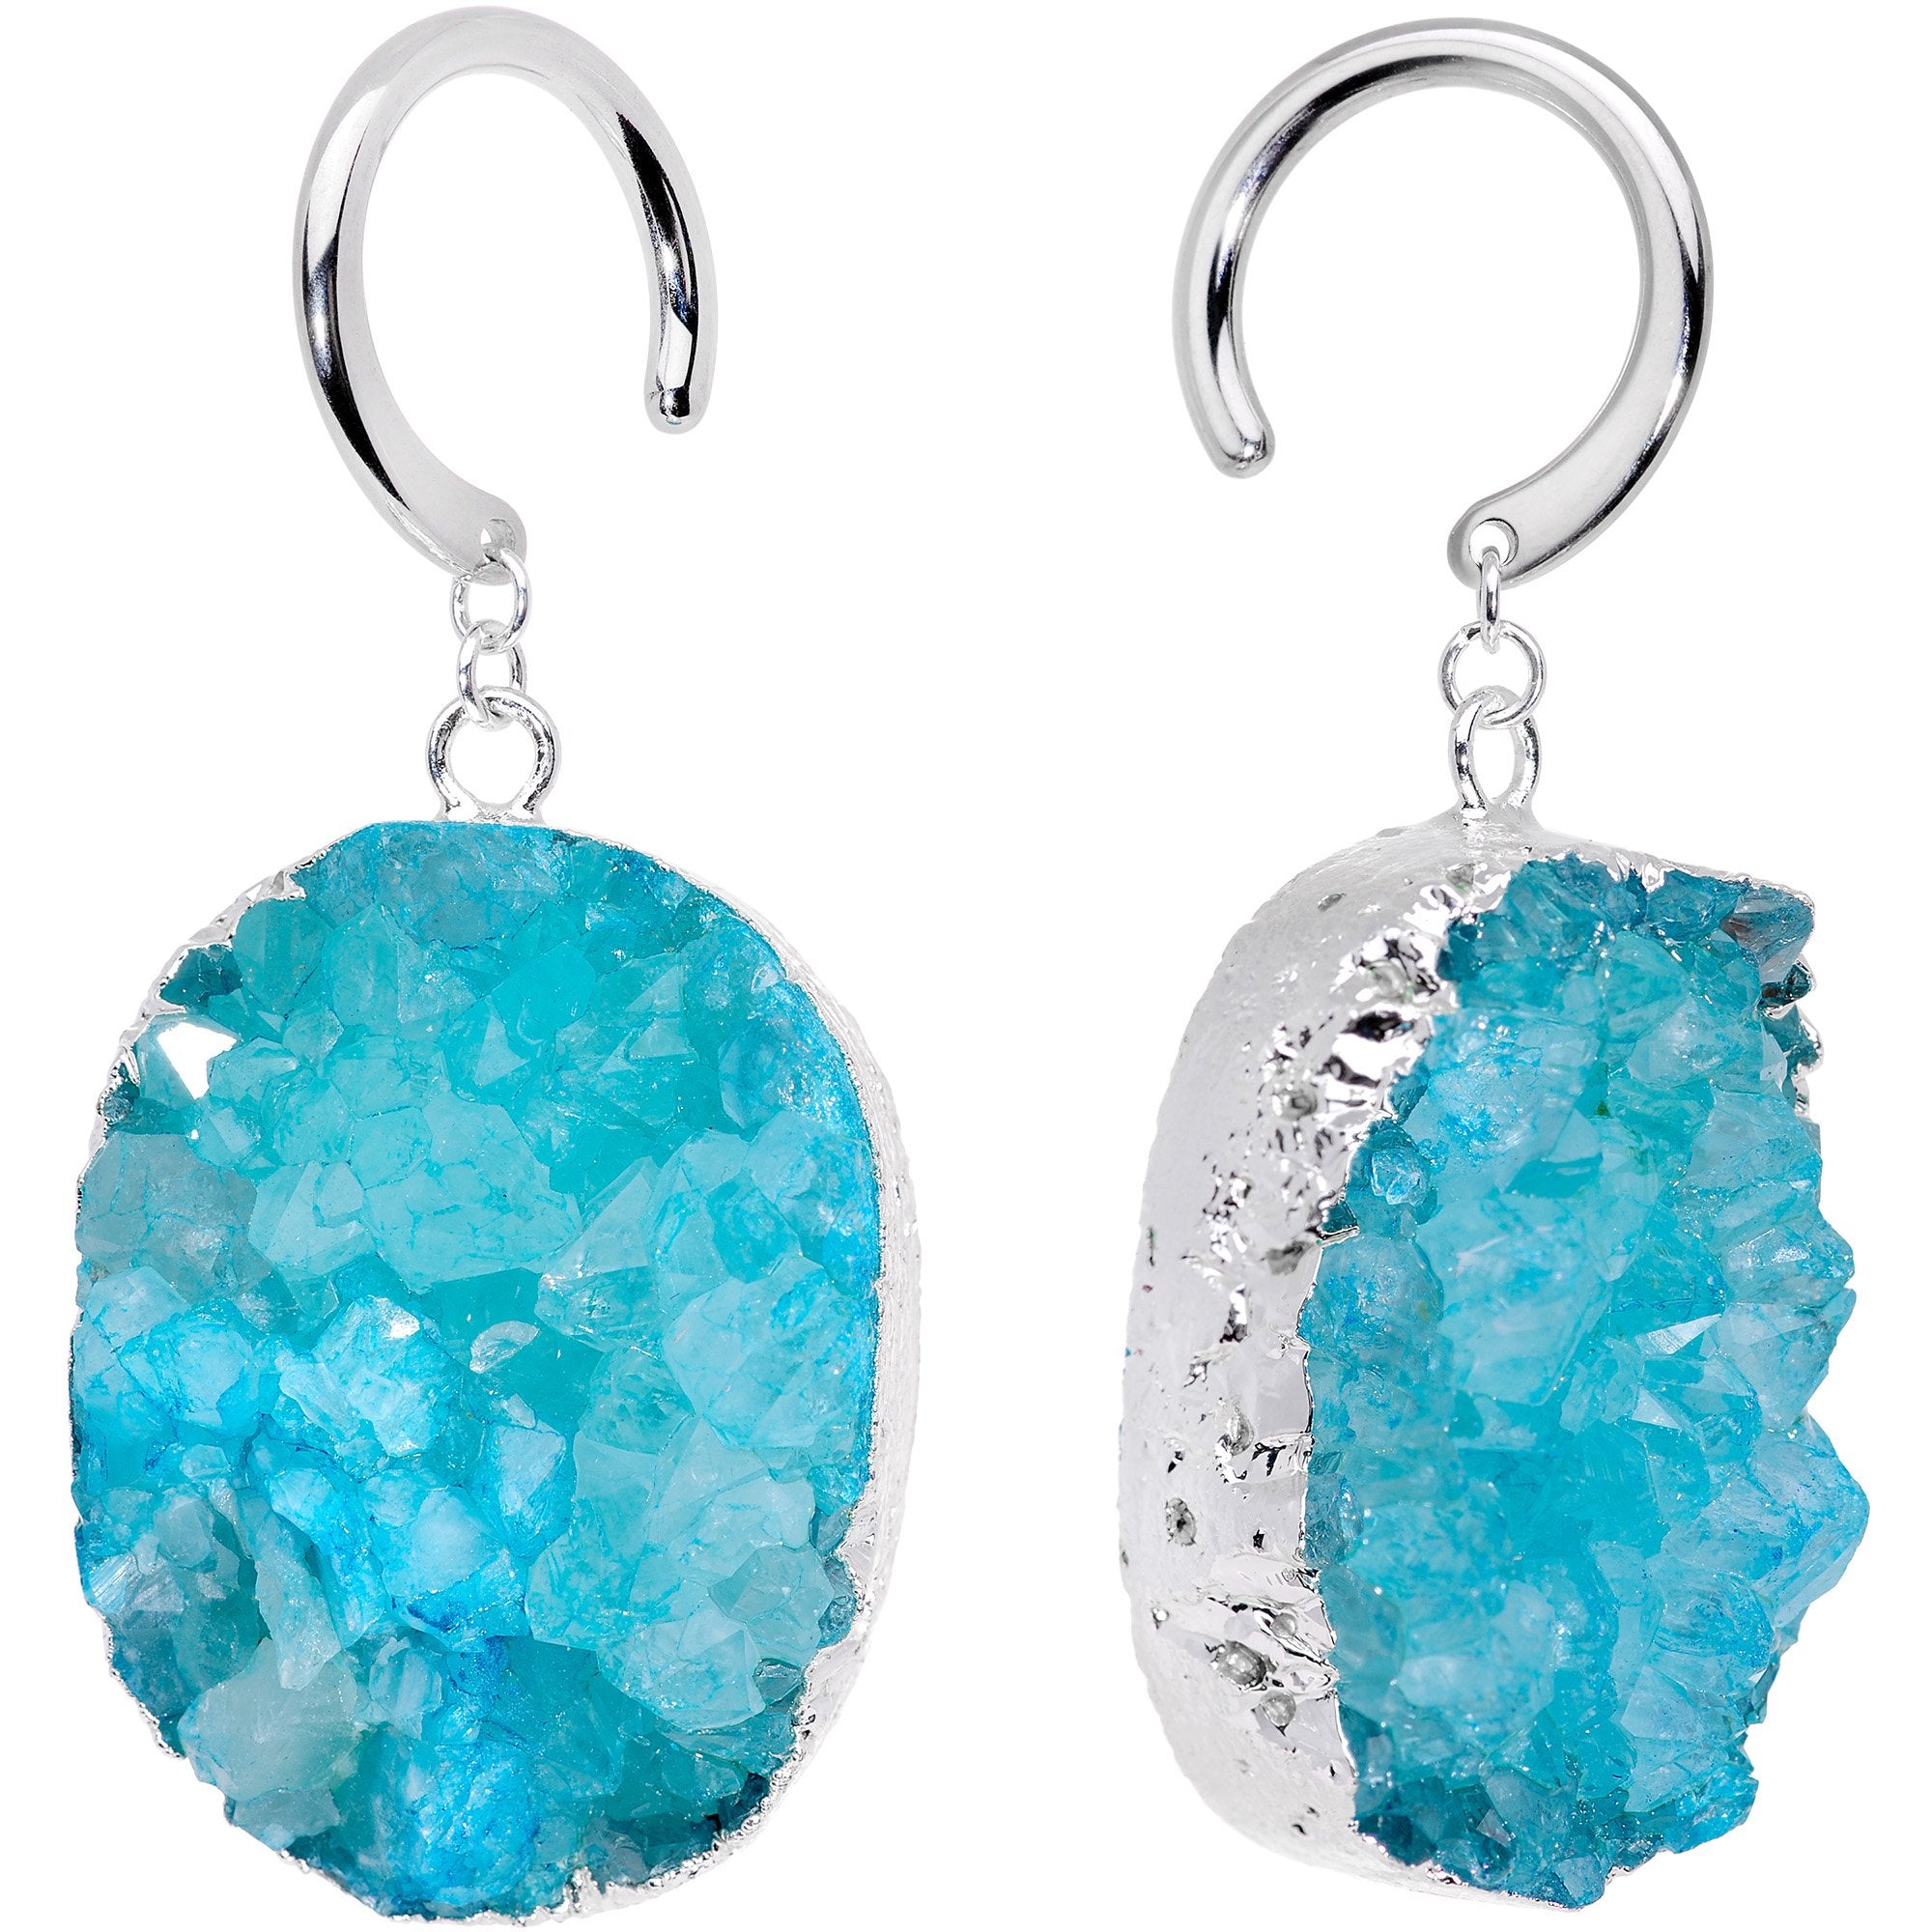 Handcrafted Steel Nautical Blue Natural Druzy Agate Ear Weights